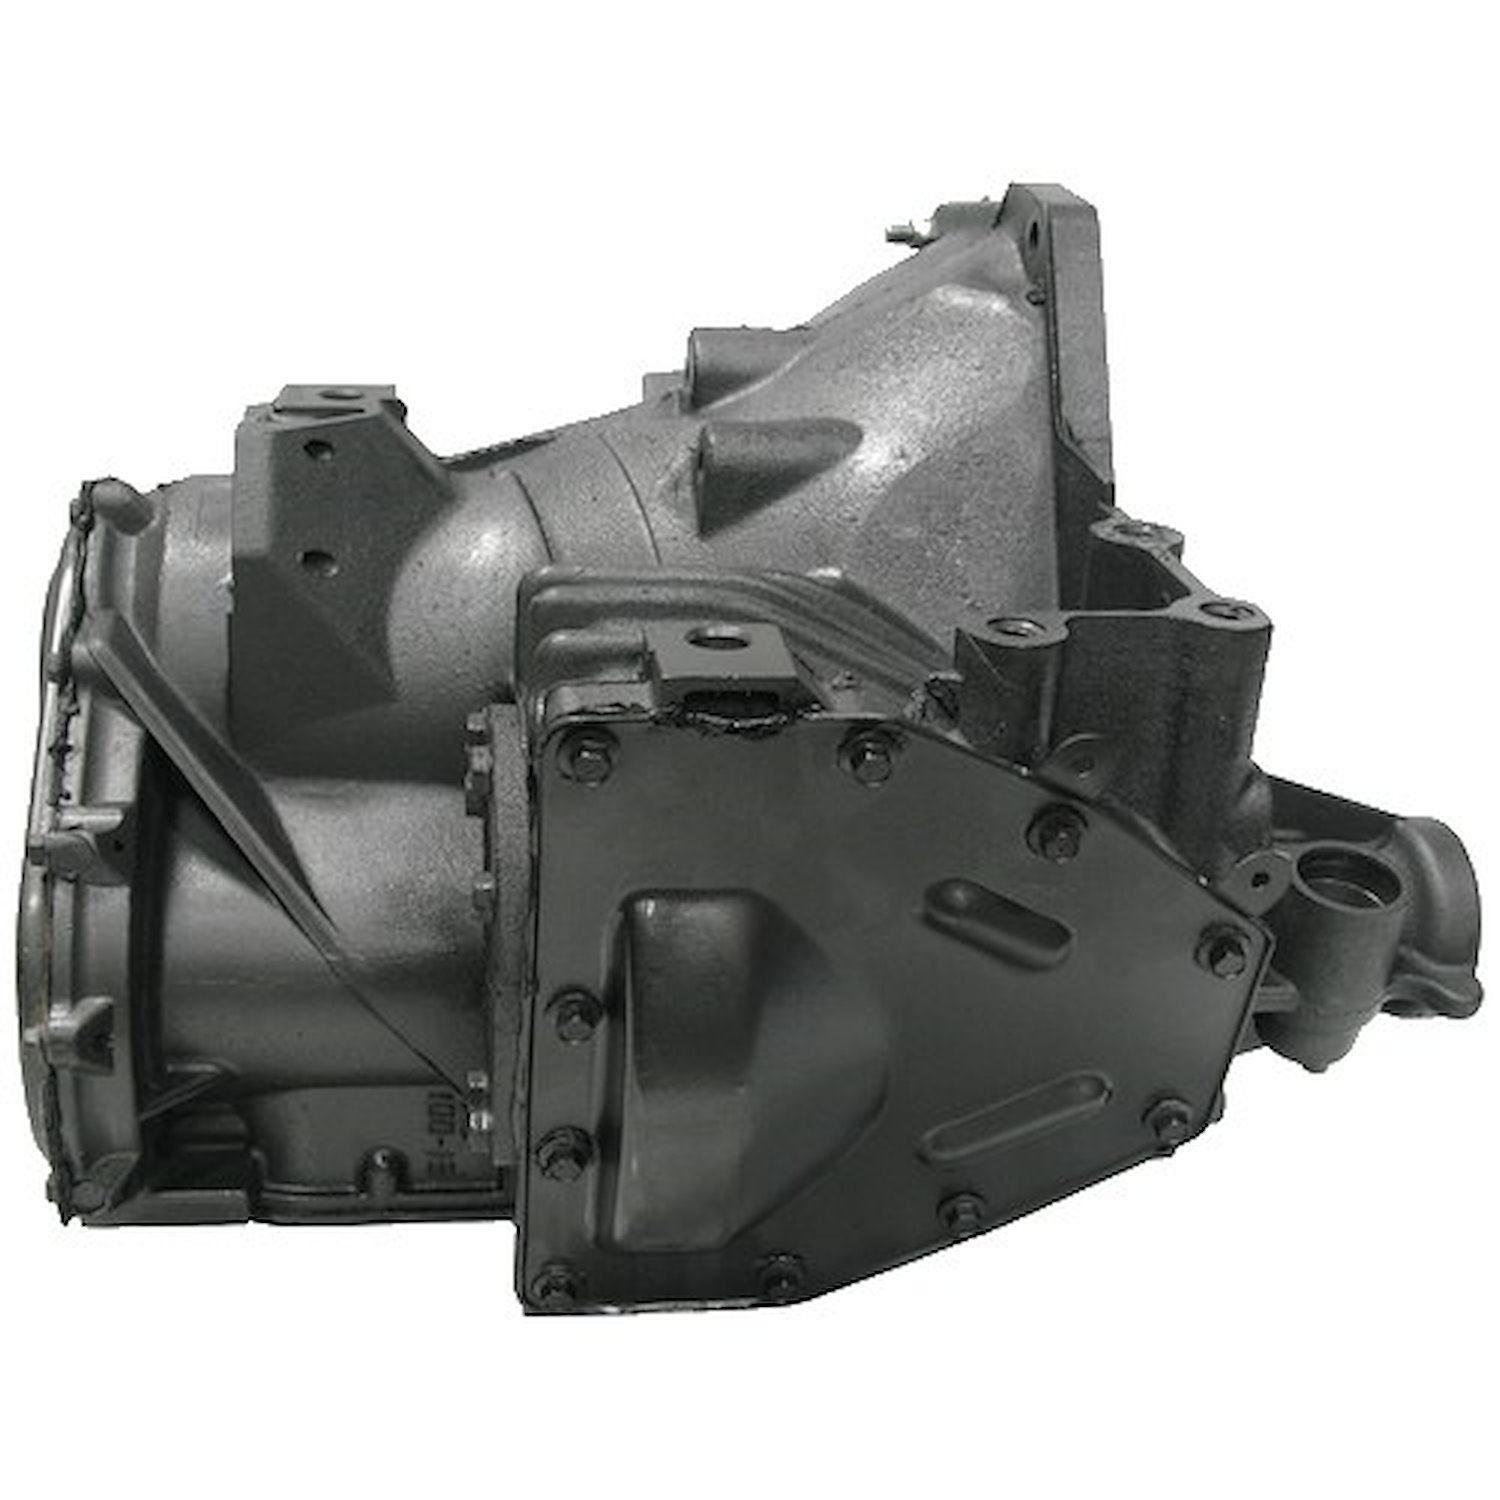 31TH Reman Auto Trans Fits 1996-1998 Dodge Caravan, Plymouth Voyager, Grand Voyager w/3.0L V6 Eng.